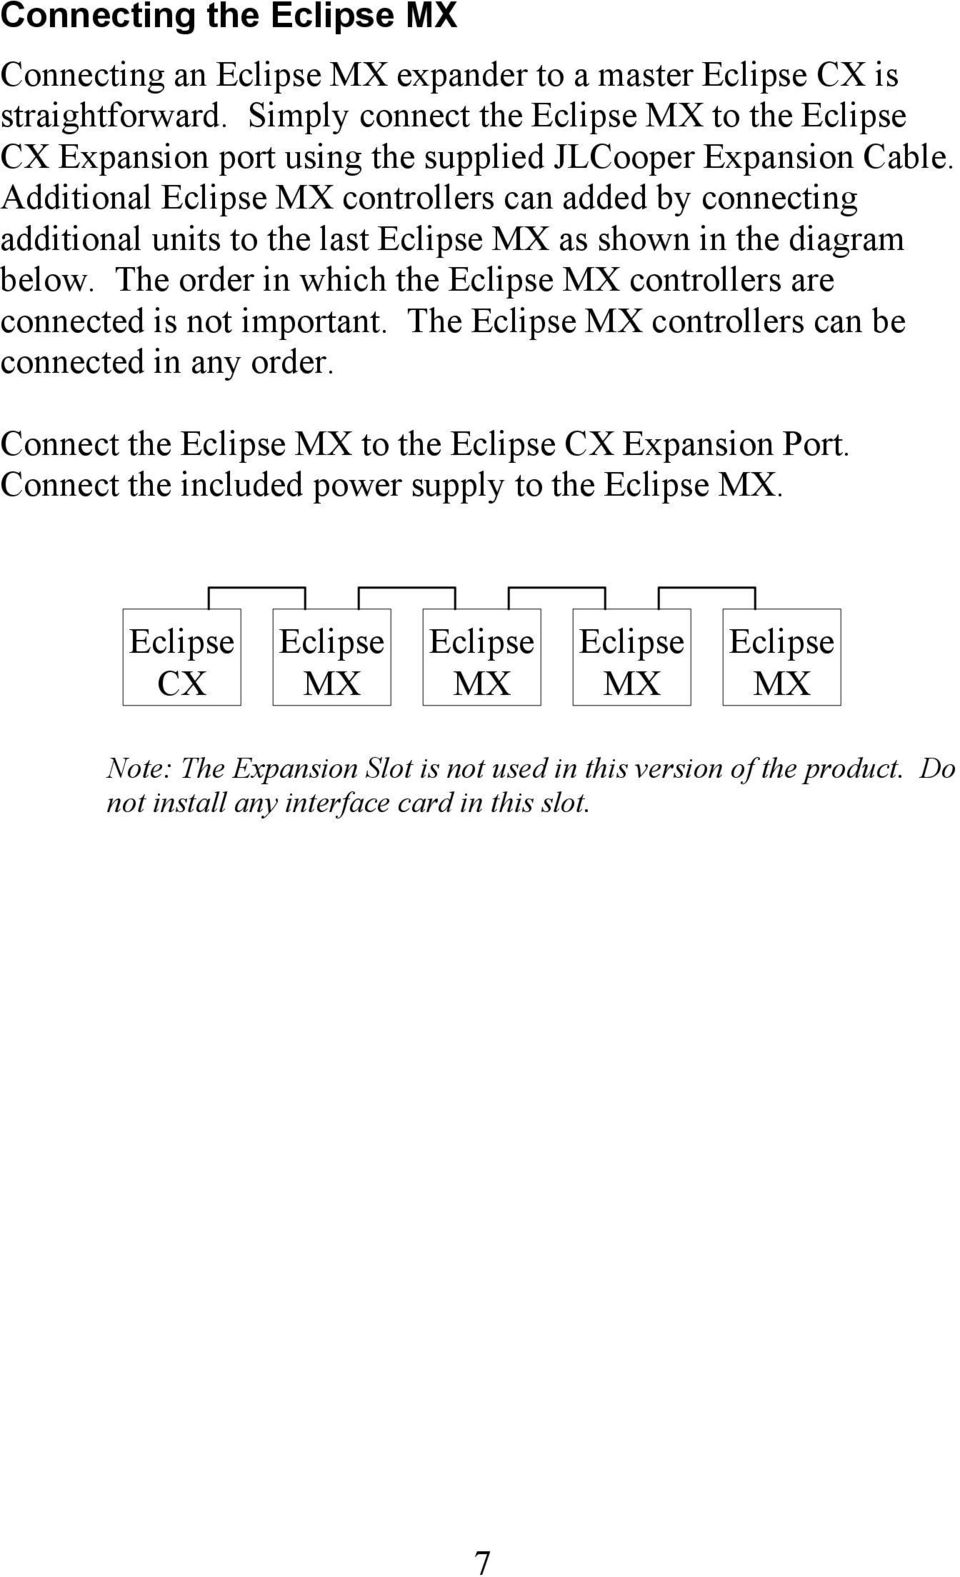 Additional Eclipse MX controllers can added by connecting additional units to the last Eclipse MX as shown in the diagram below.